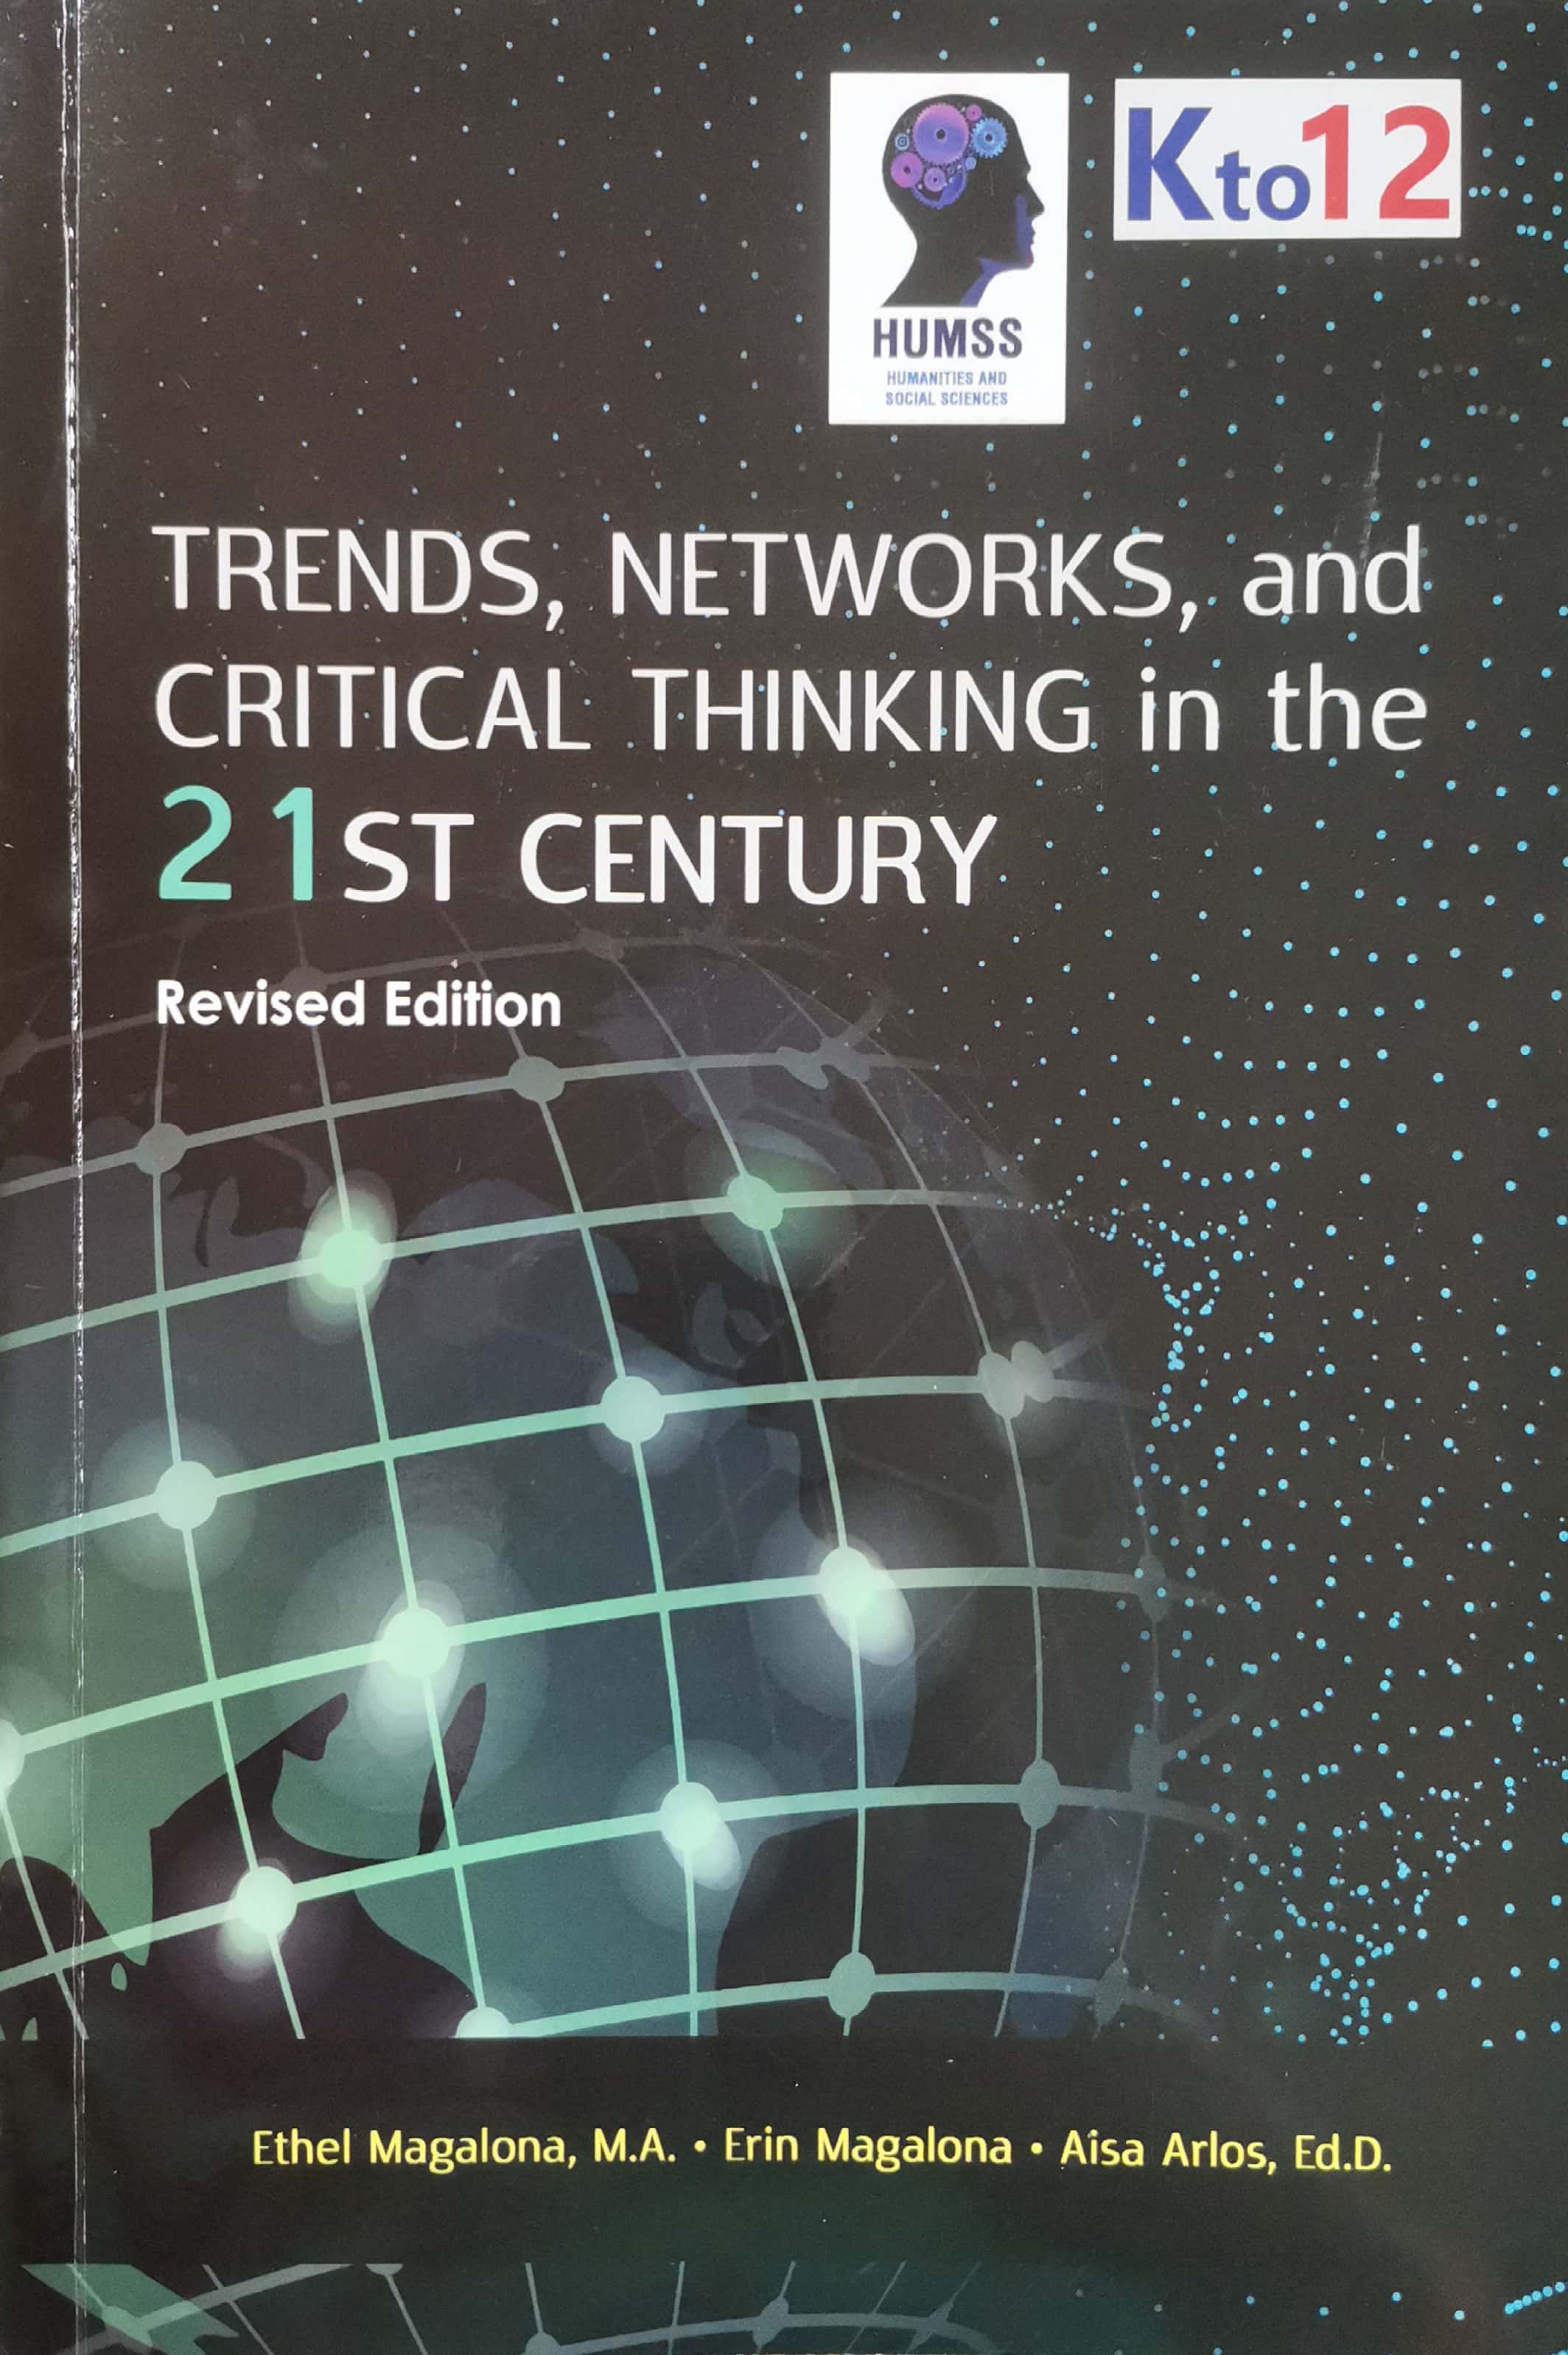 critical thinking in the 21st century pdf